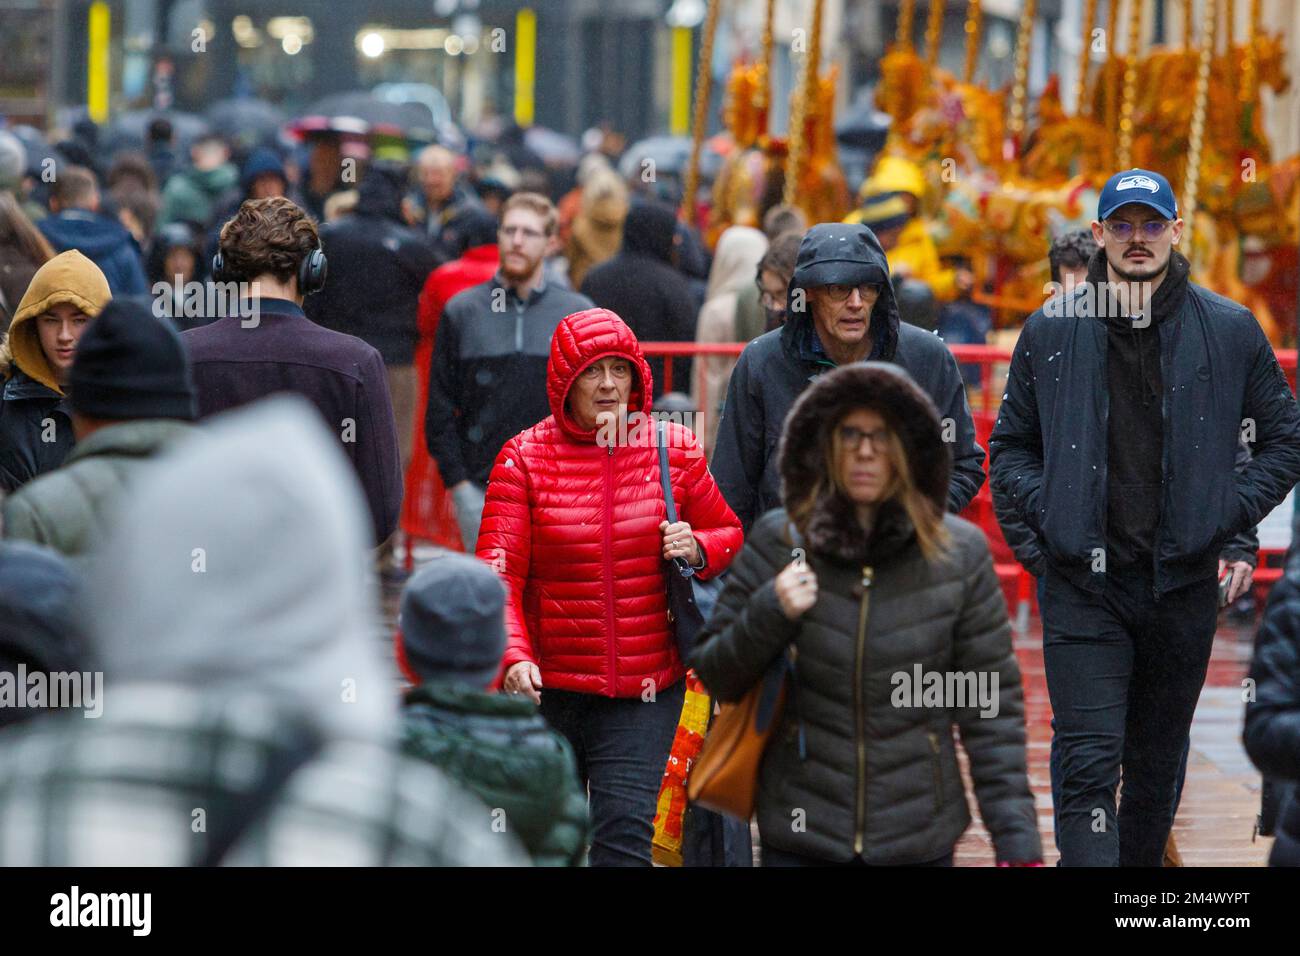 Bath, UK, 23rd Dec, 2022. With only two days left until Christmas day crowds of shoppers doing last minute shopping are pictured in Bath city centre. Many shops have tried to attract customers by starting their sales early.  Credit: Lynchpics/Alamy Live News Stock Photo